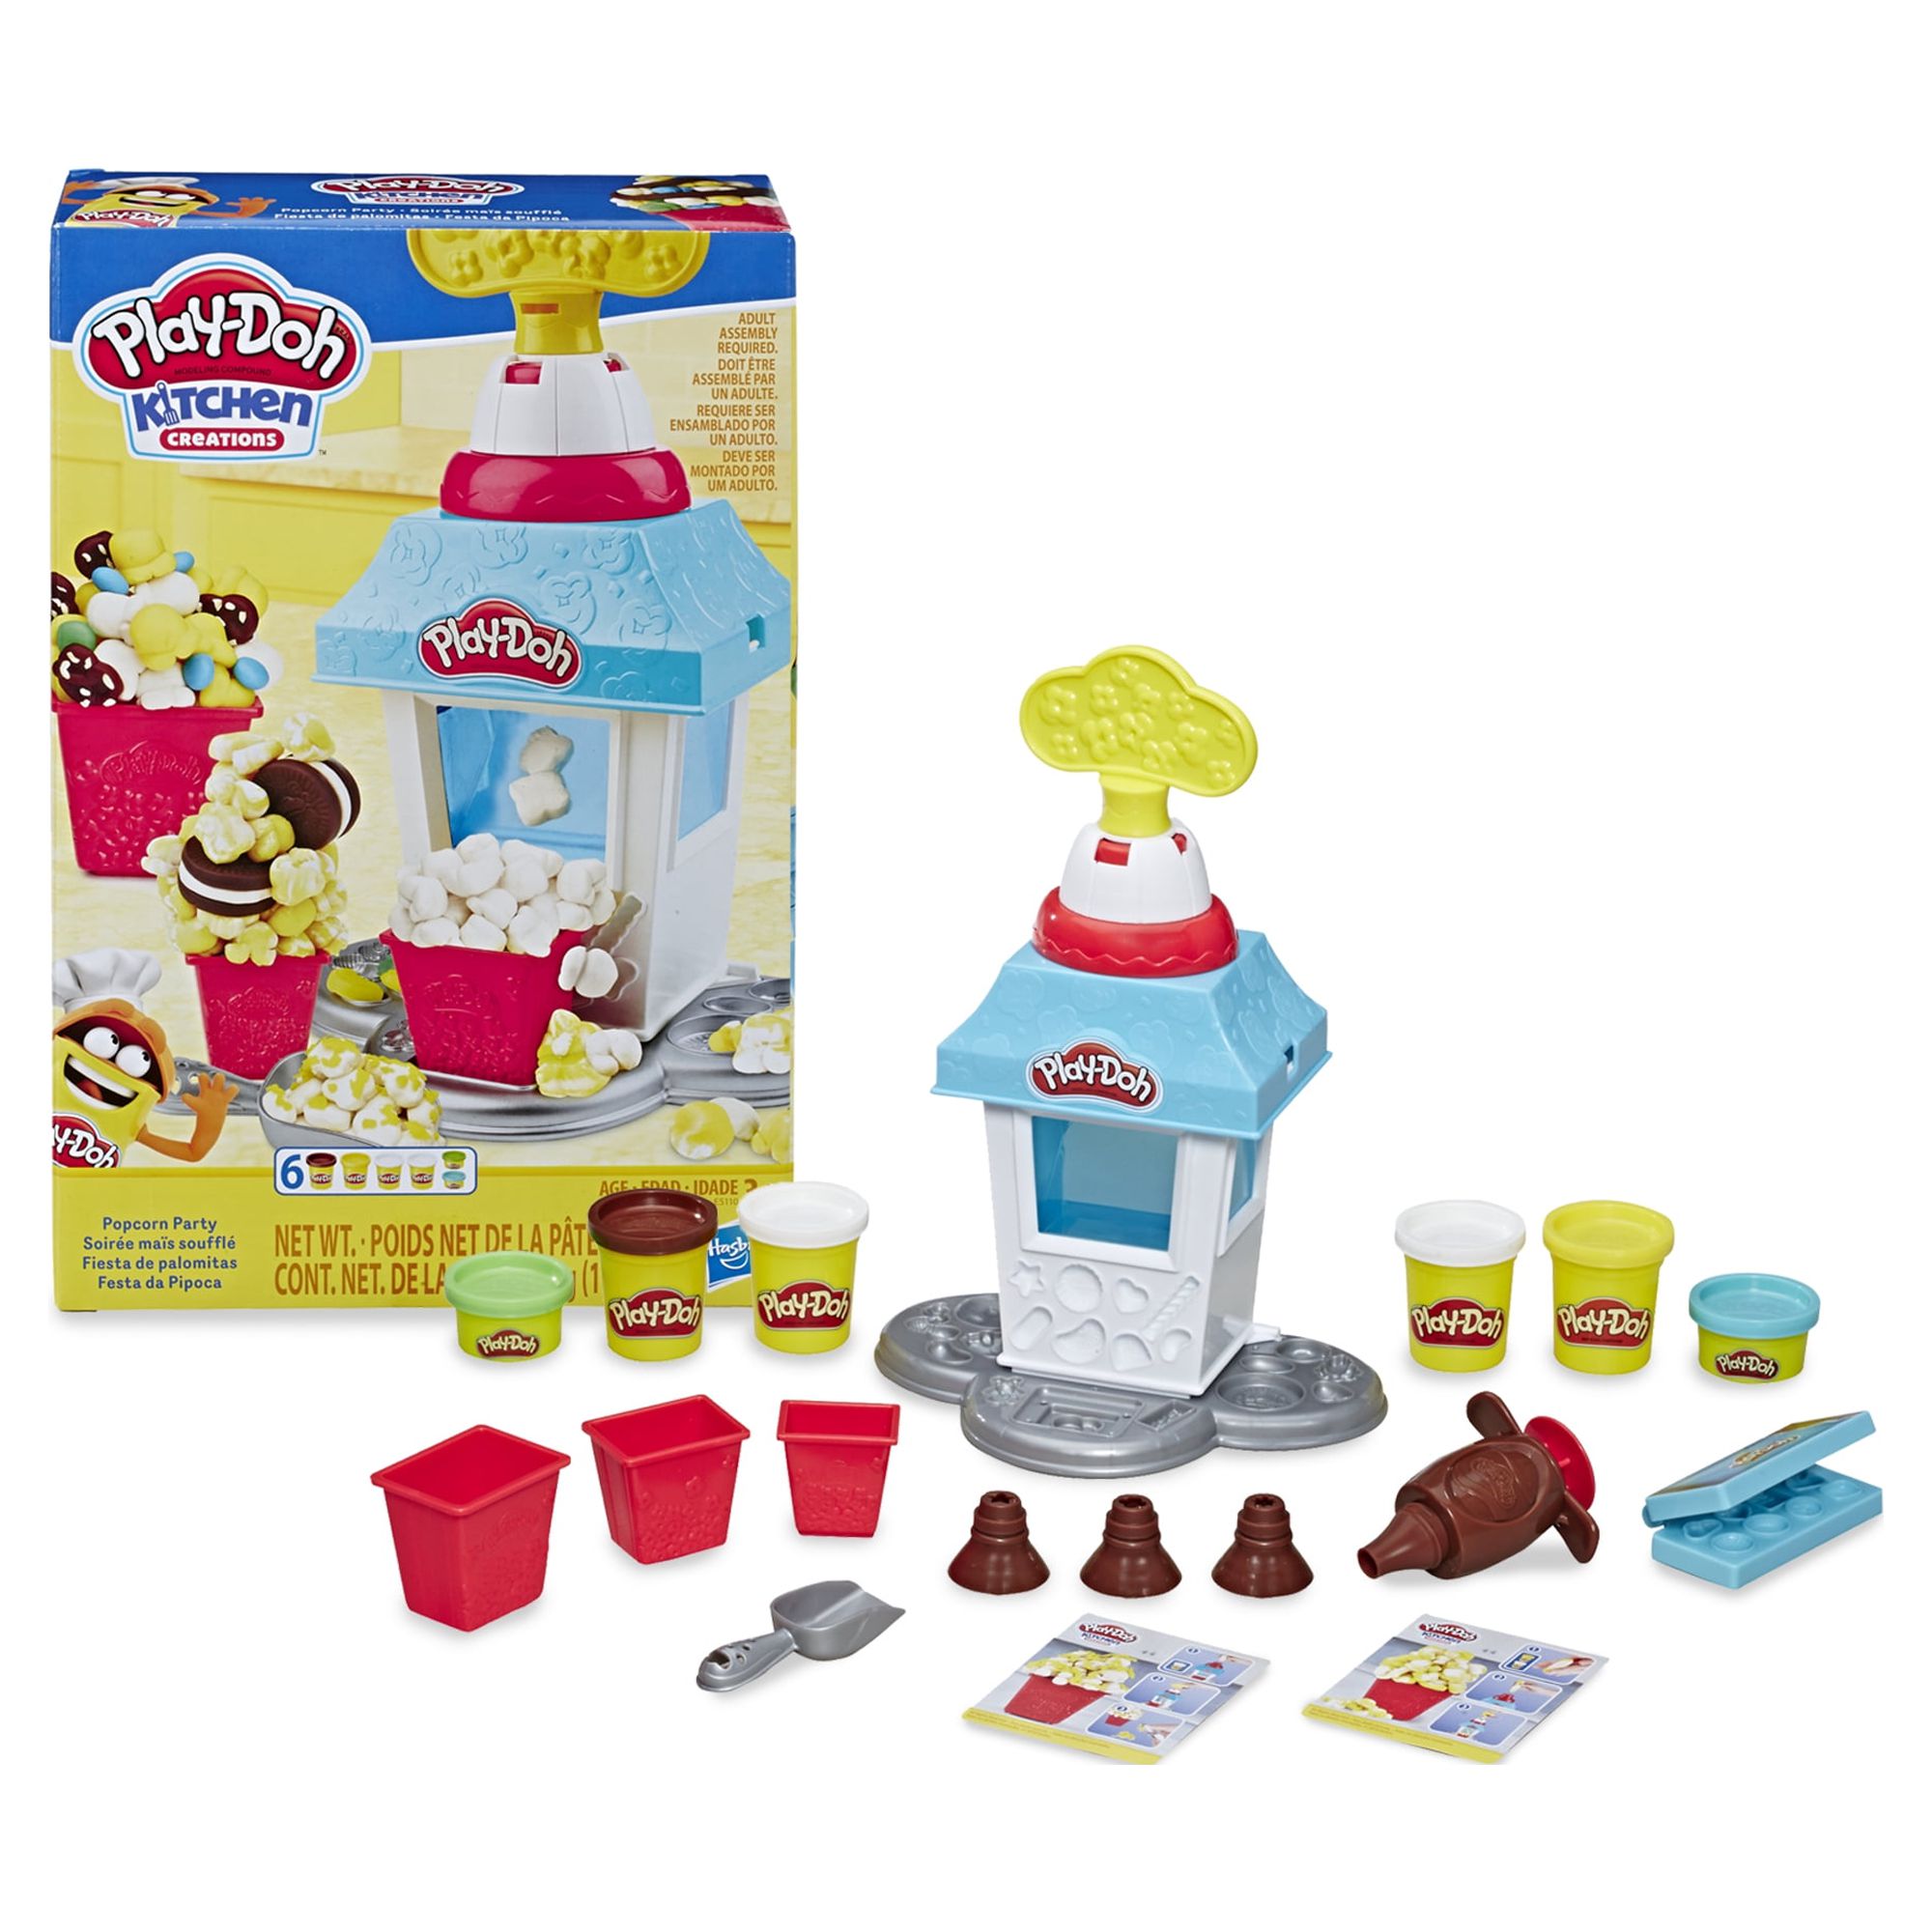 Play-Doh Kitchen Creations Popcorn Party Play Food Set, 6 Cans (10 oz) - image 1 of 15